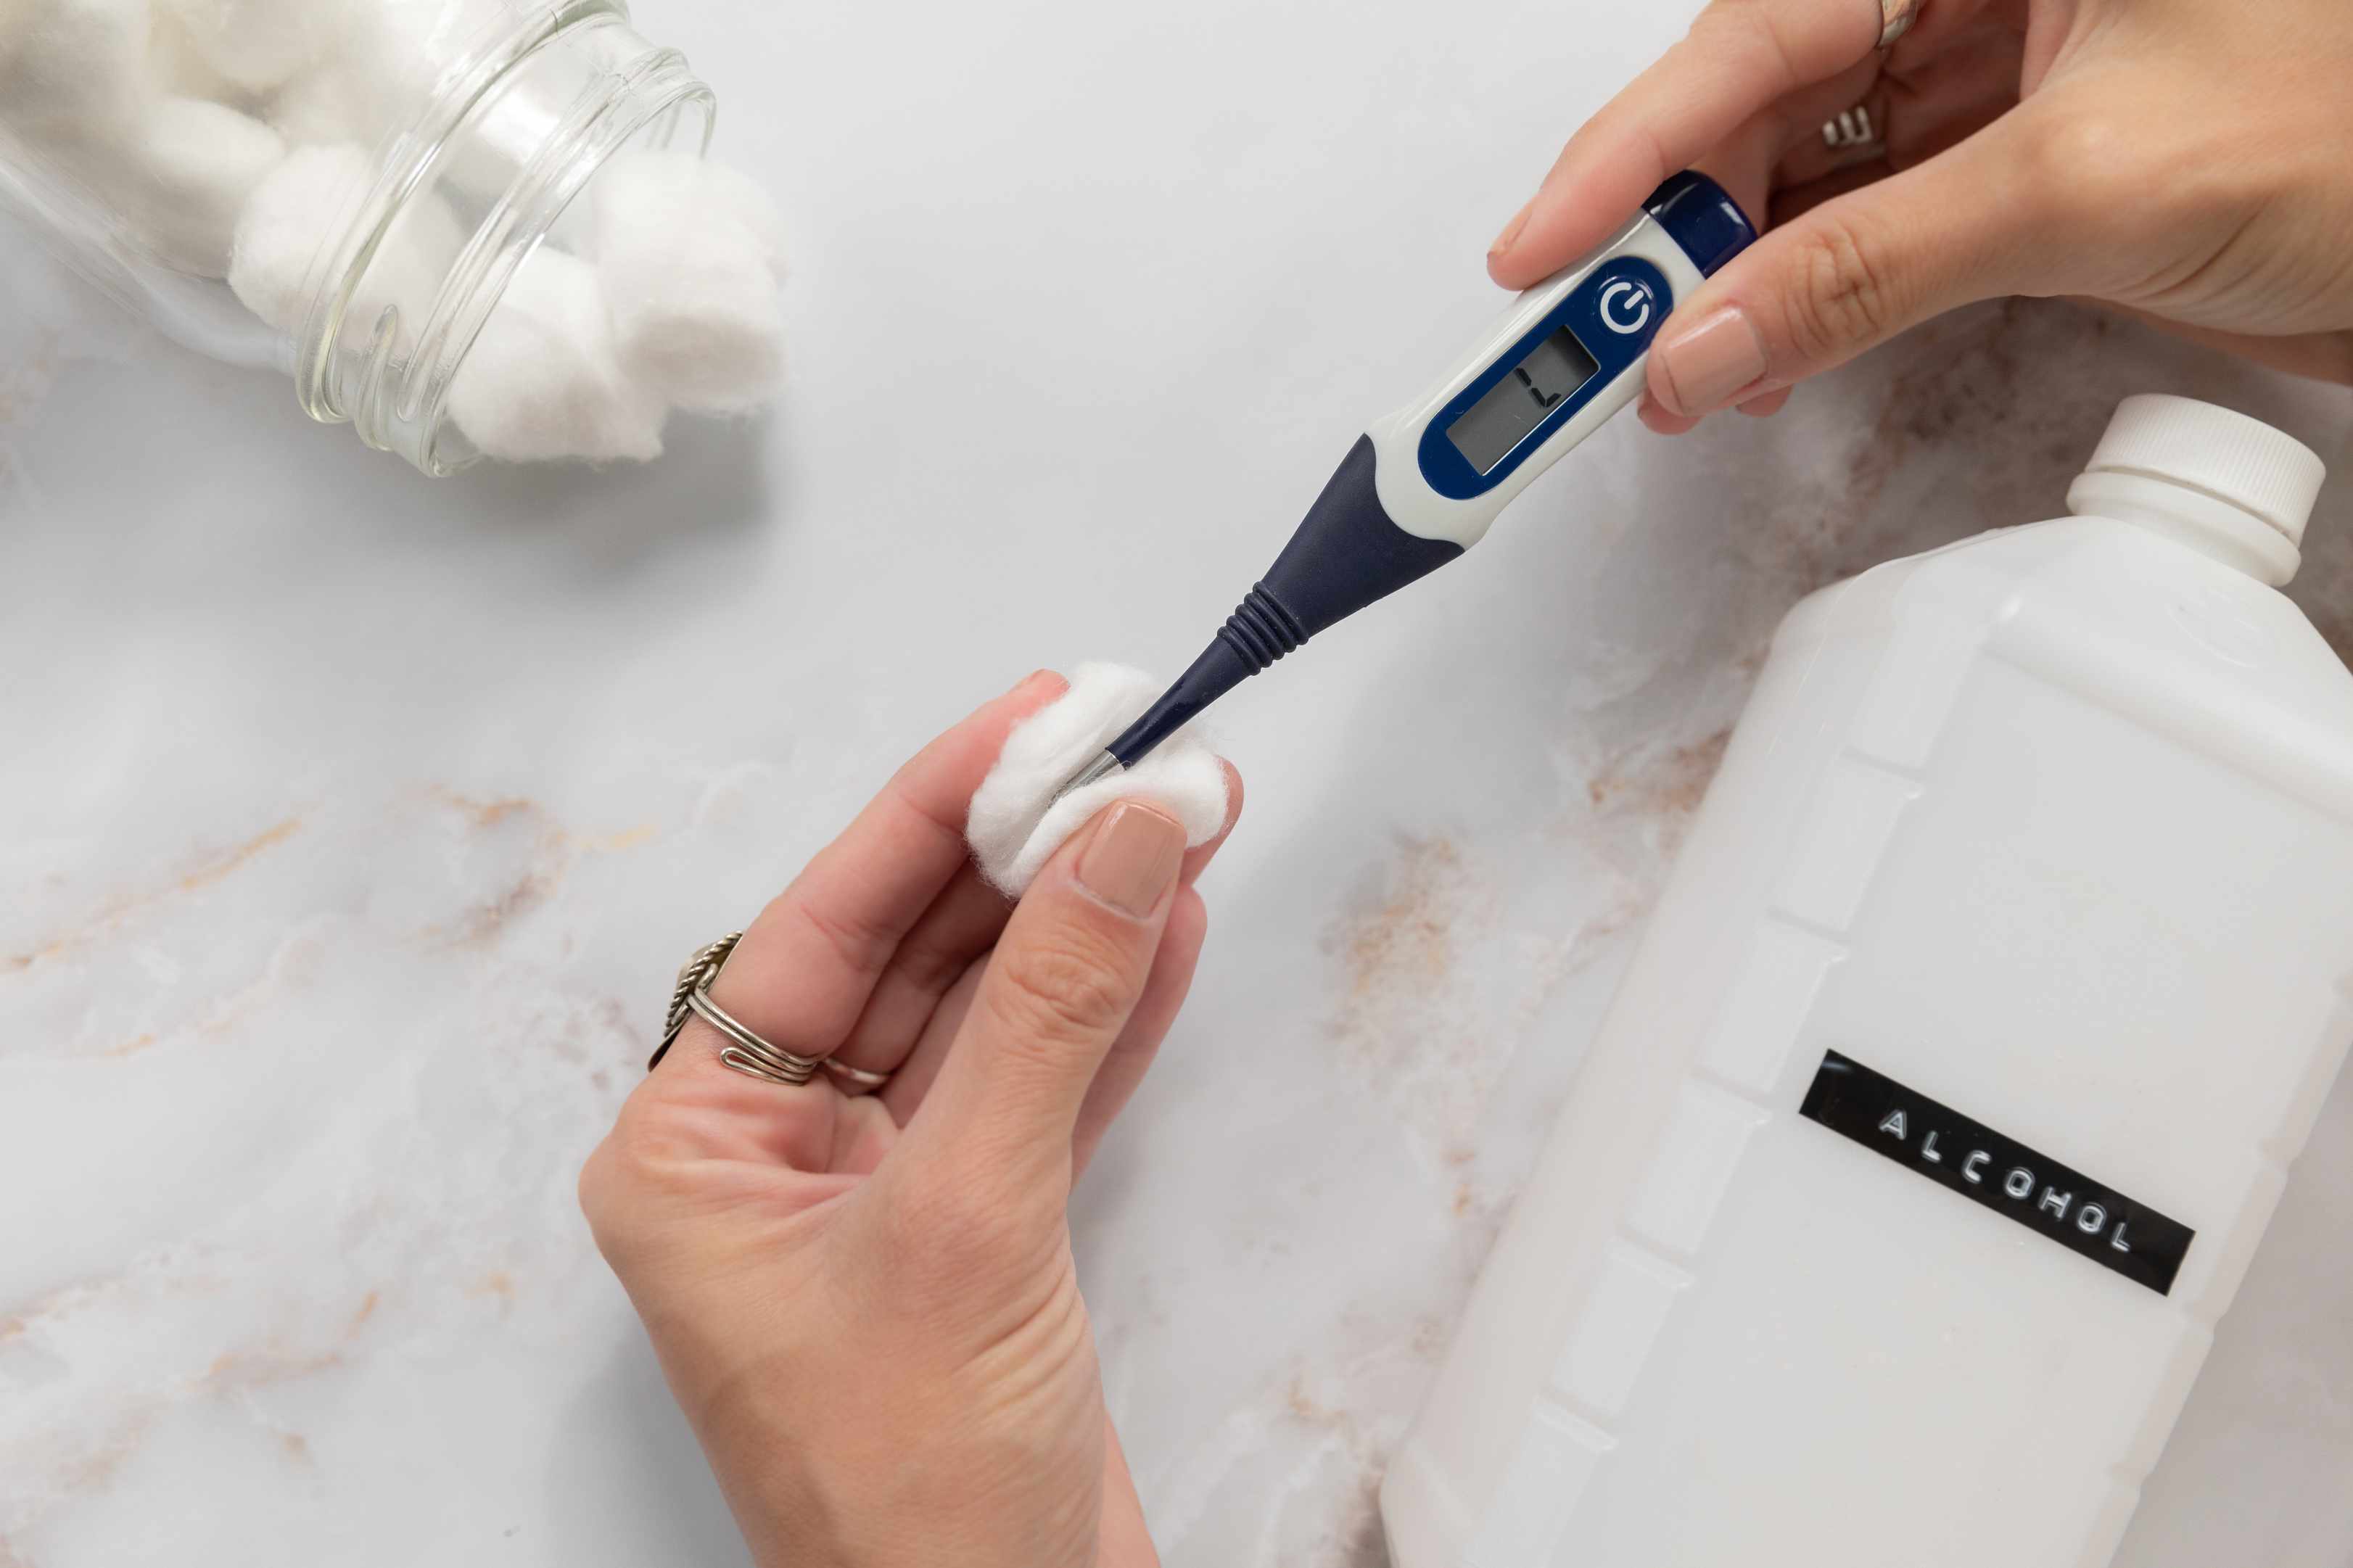 How To Clean A Digital Thermometer